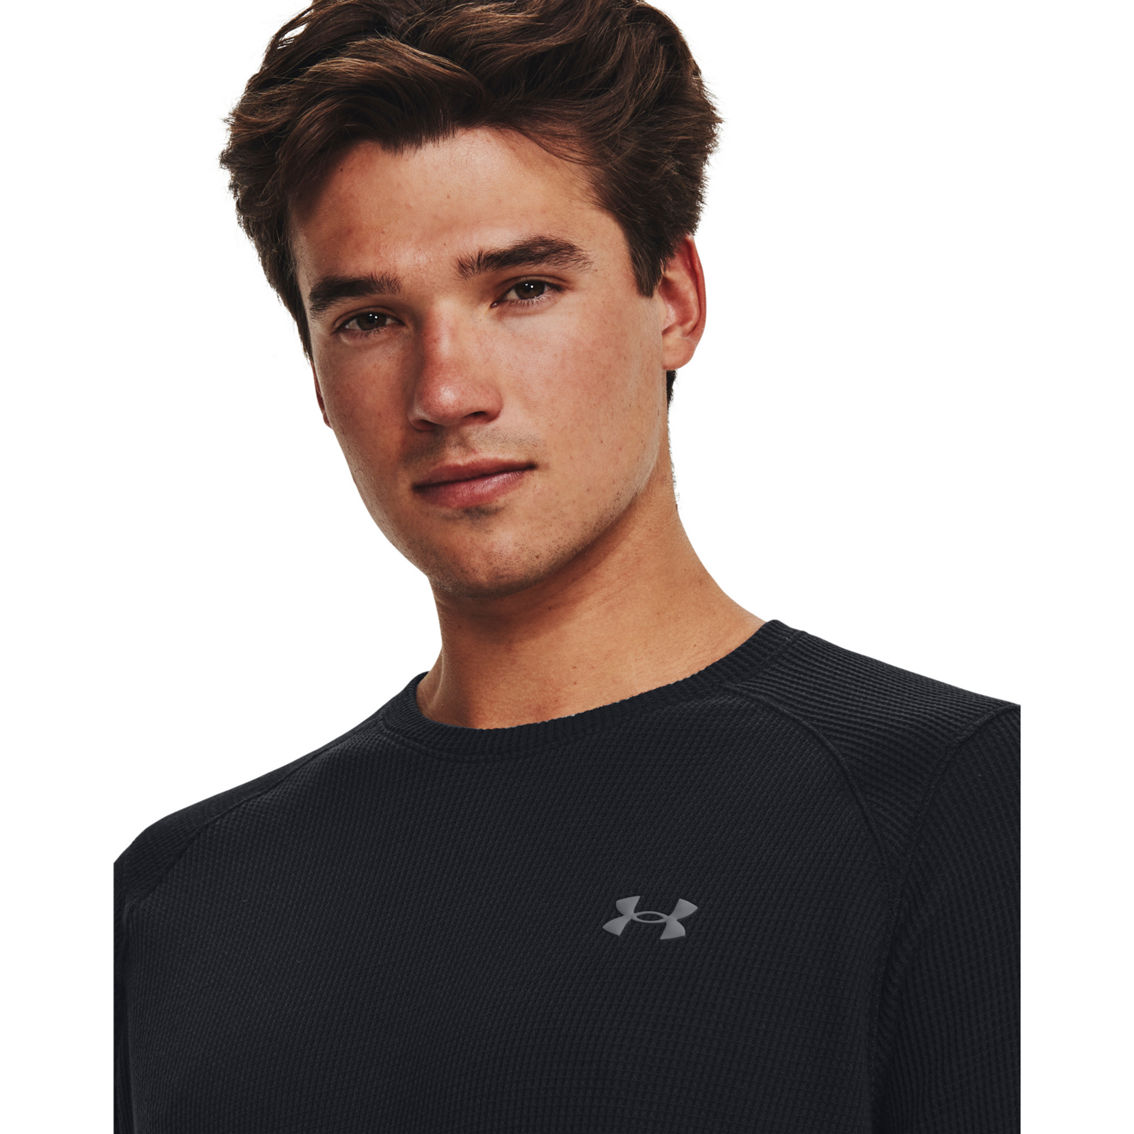 Under Armour Waffle Knit Max Crew Sweater - Image 4 of 6